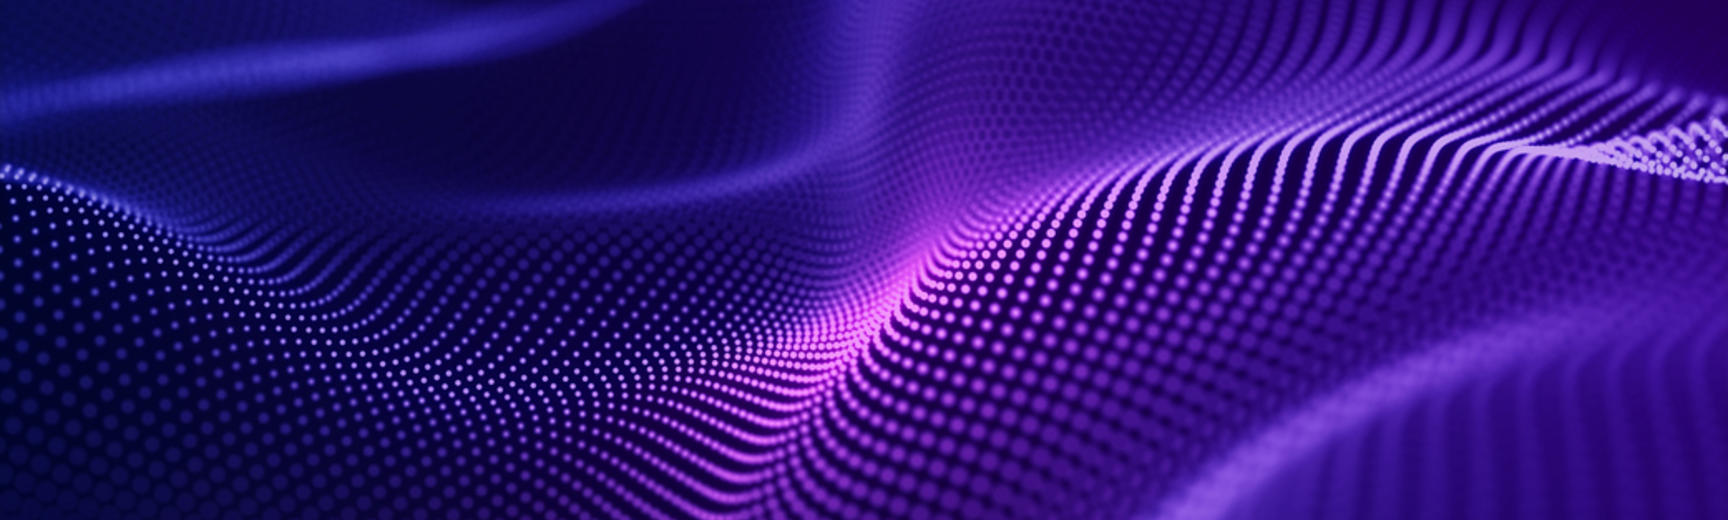 Abstract wave background with many glowing particles